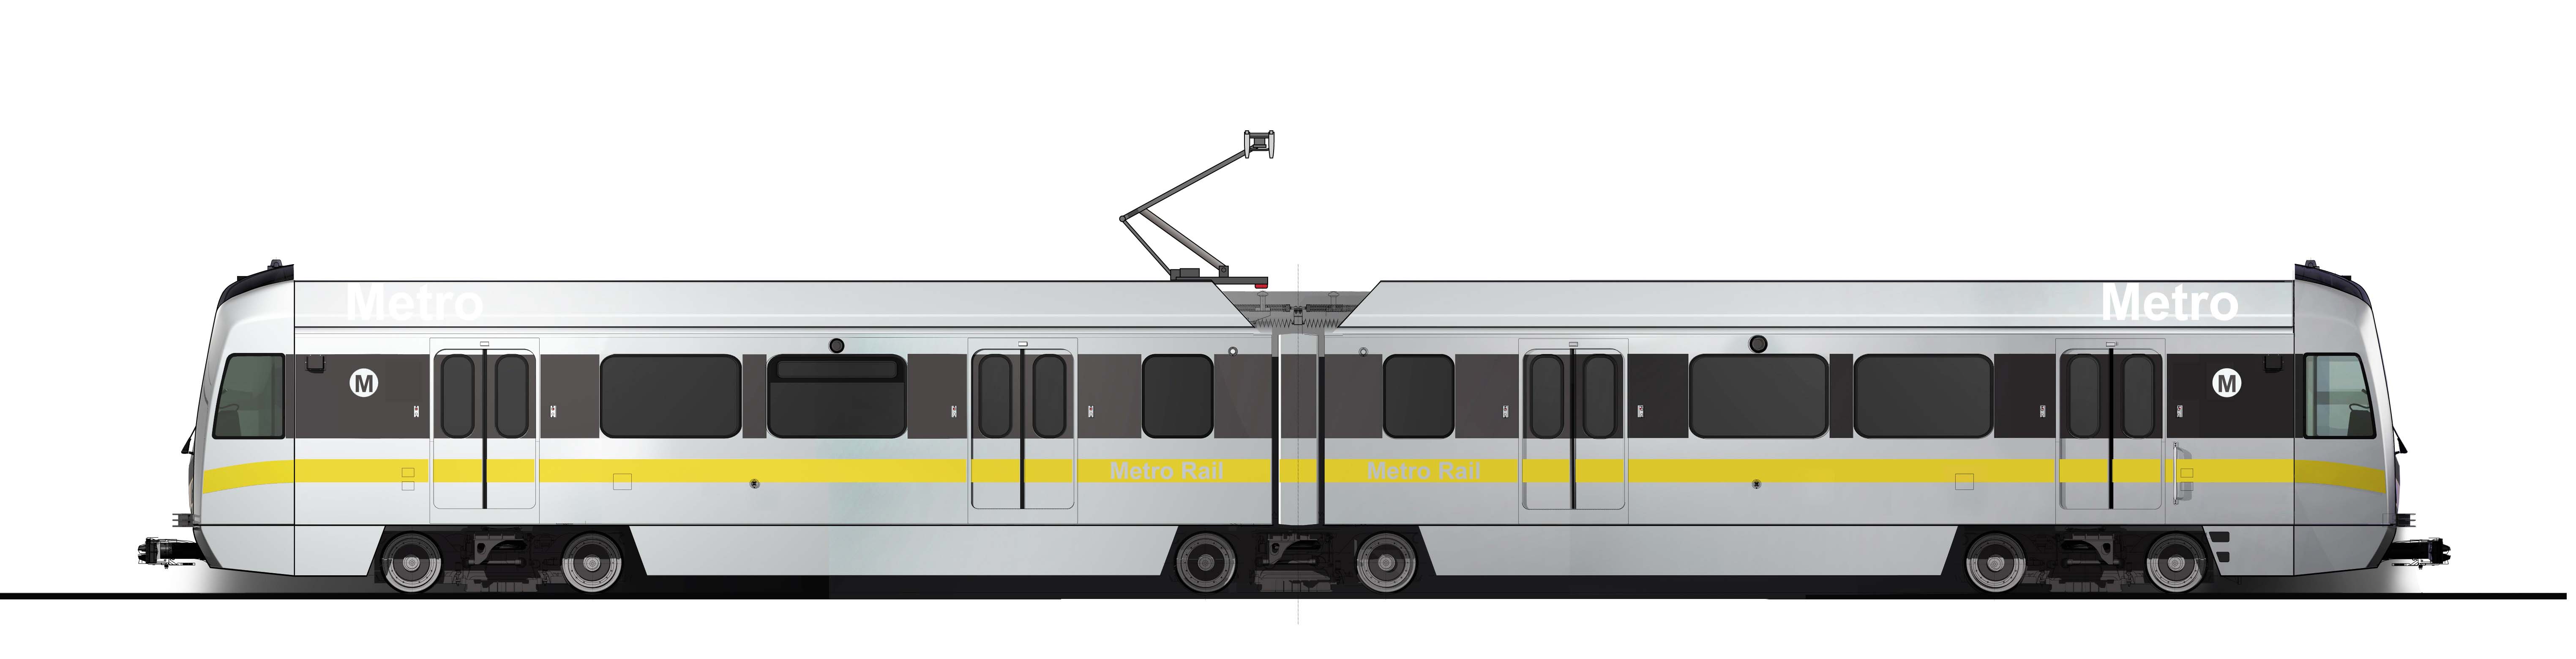 Metro Board approves contract to purchase new light rail cars | The ...